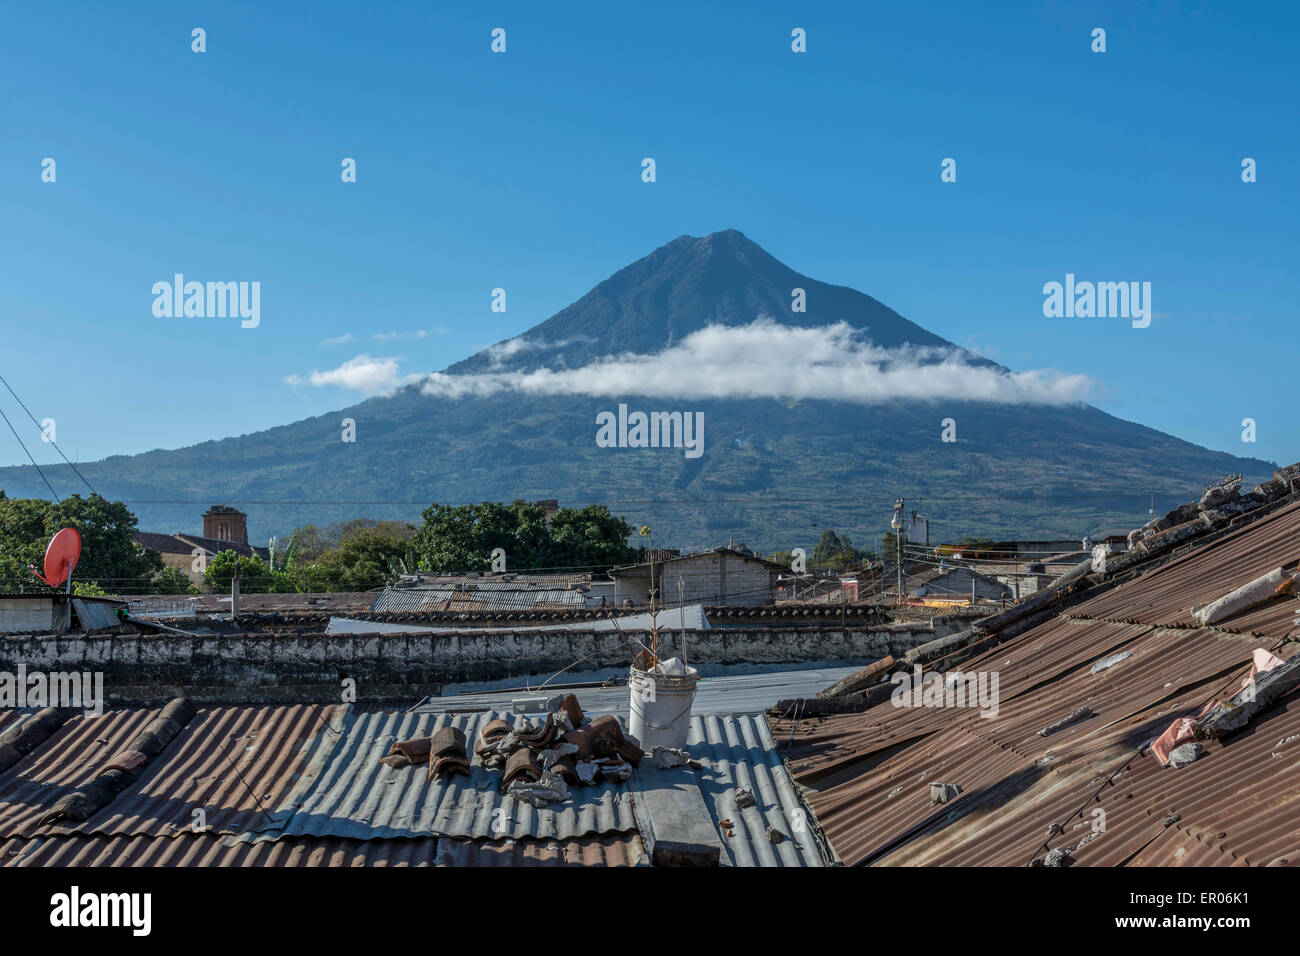 View of Volcan de Agua from a roof in Antigua Guatemala Stock Photo